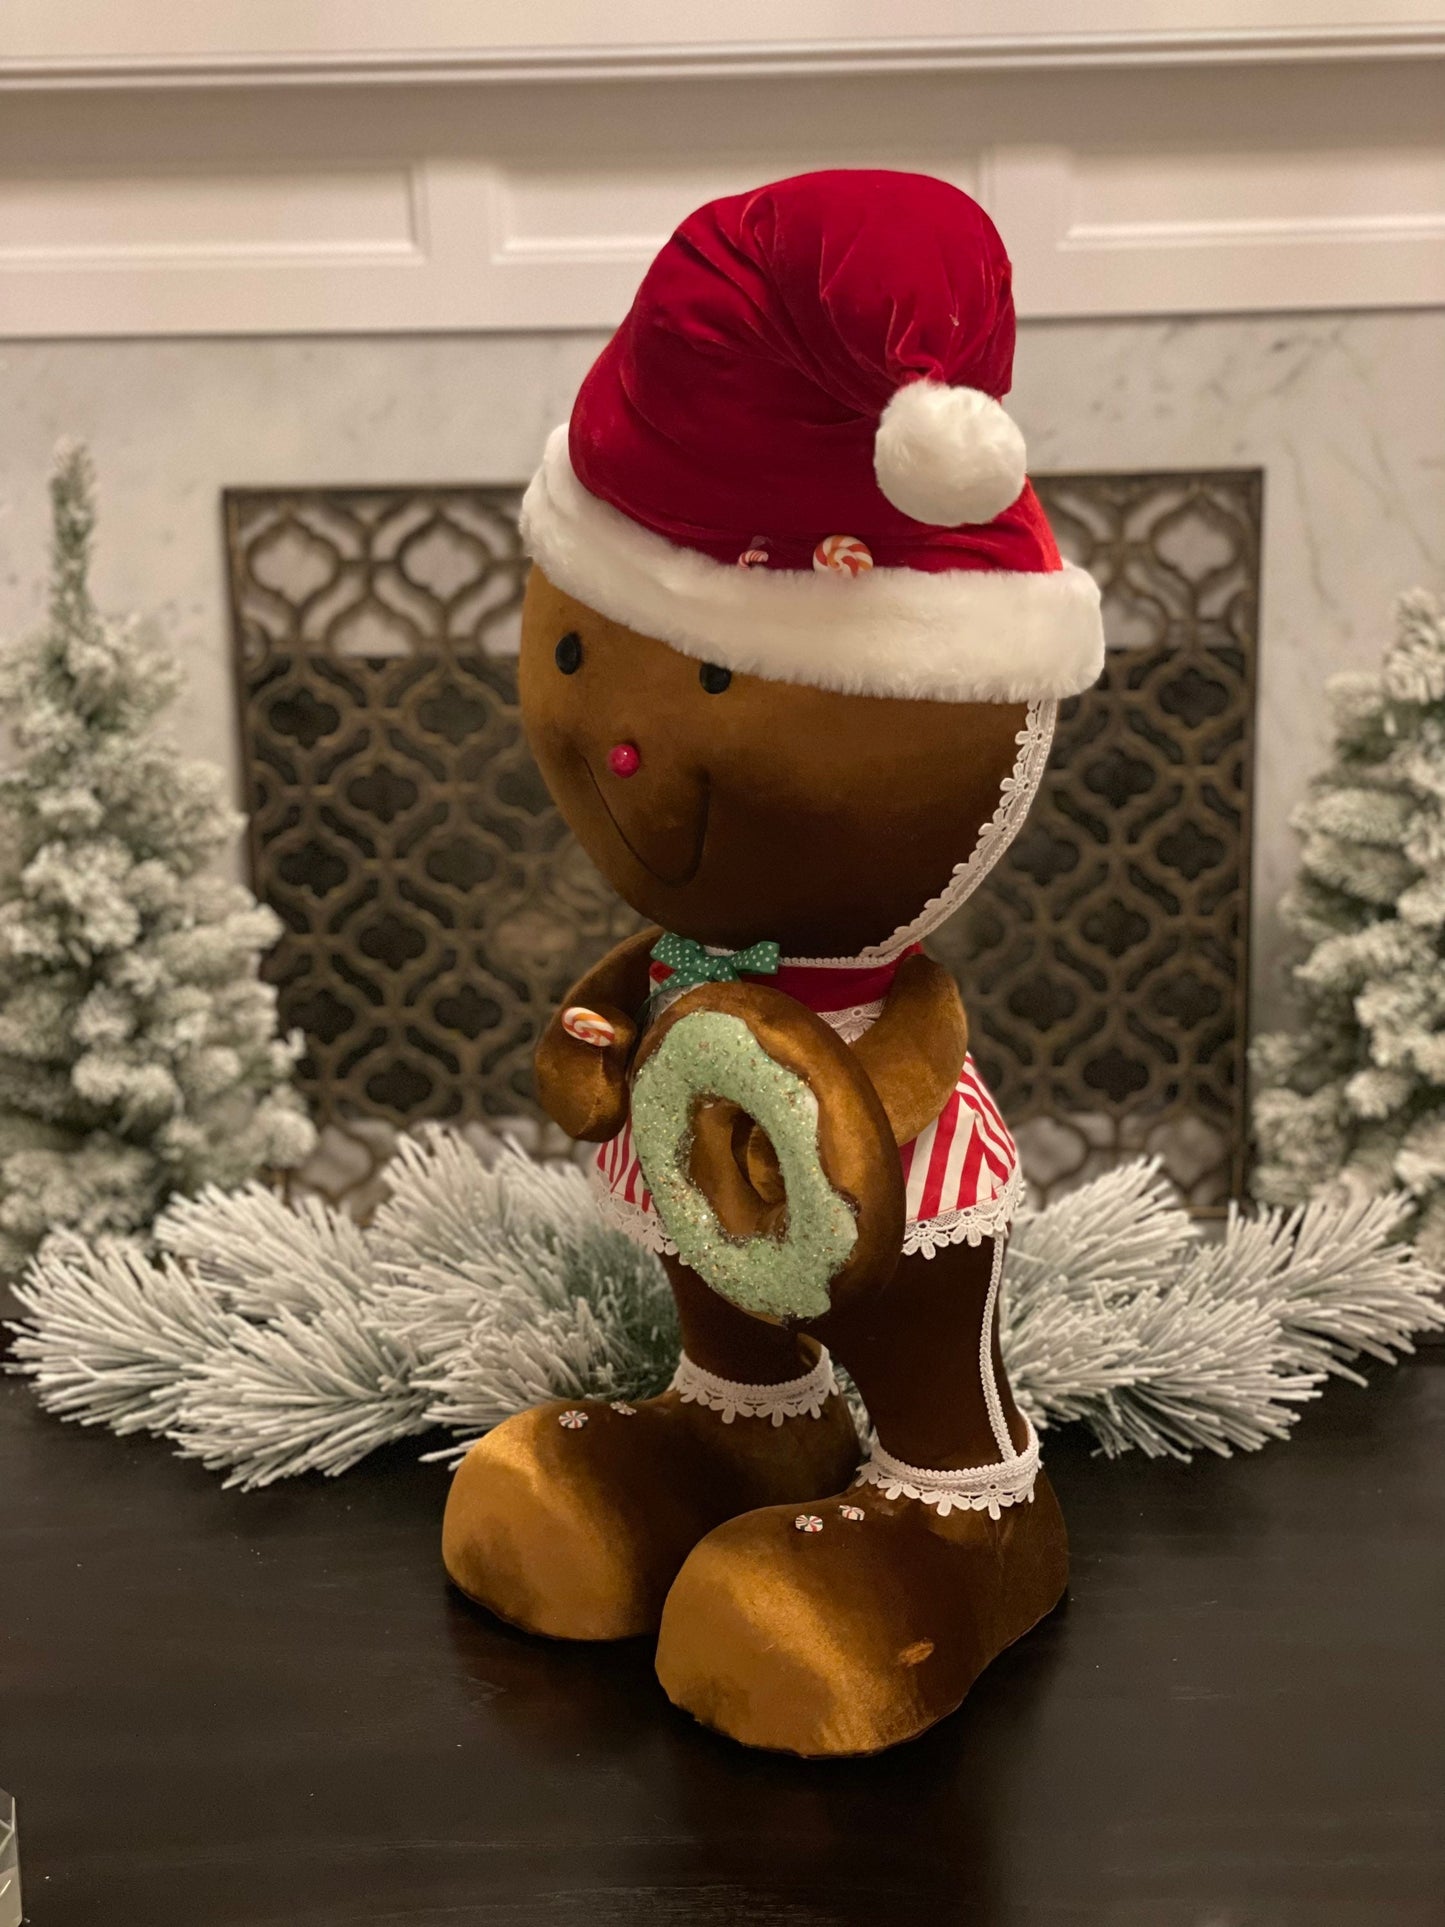 32” Gingerbread with dougnut.